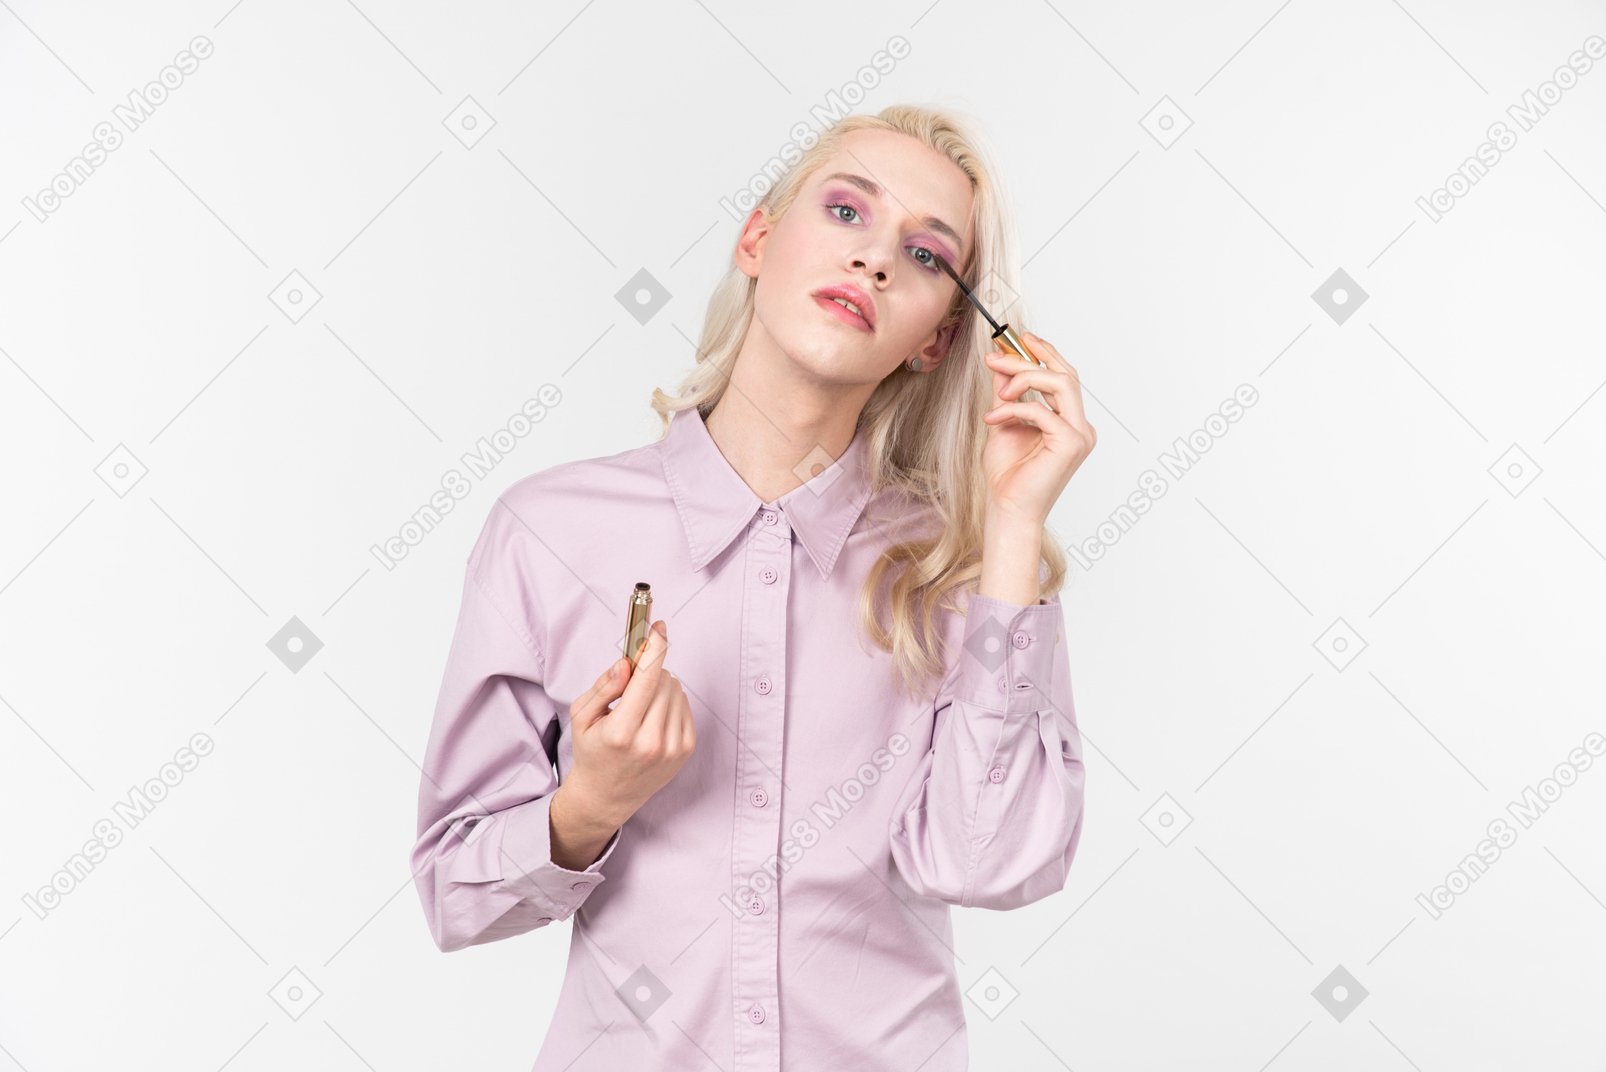 Young blond-haired person in a pastel violet shirt, doing their makeup